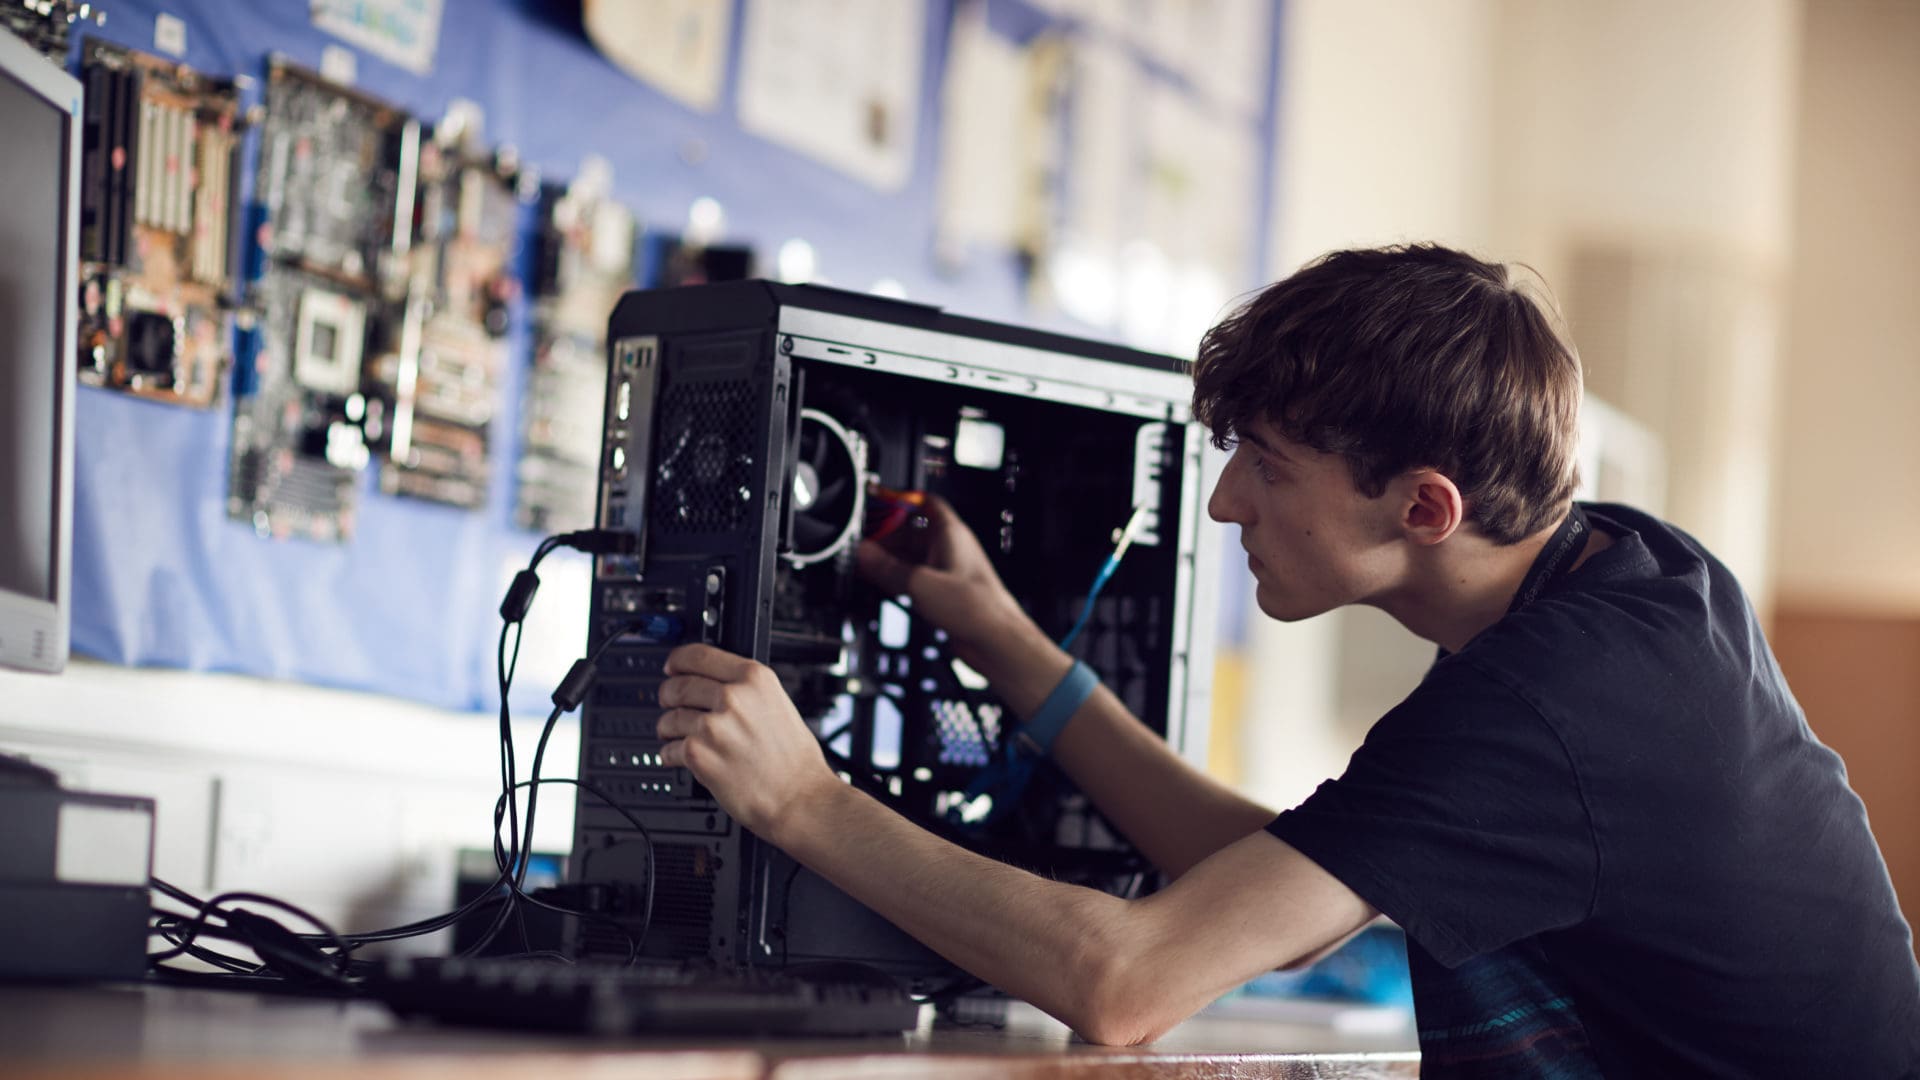 SpankBang student focusing on fixing a computer on an IT course